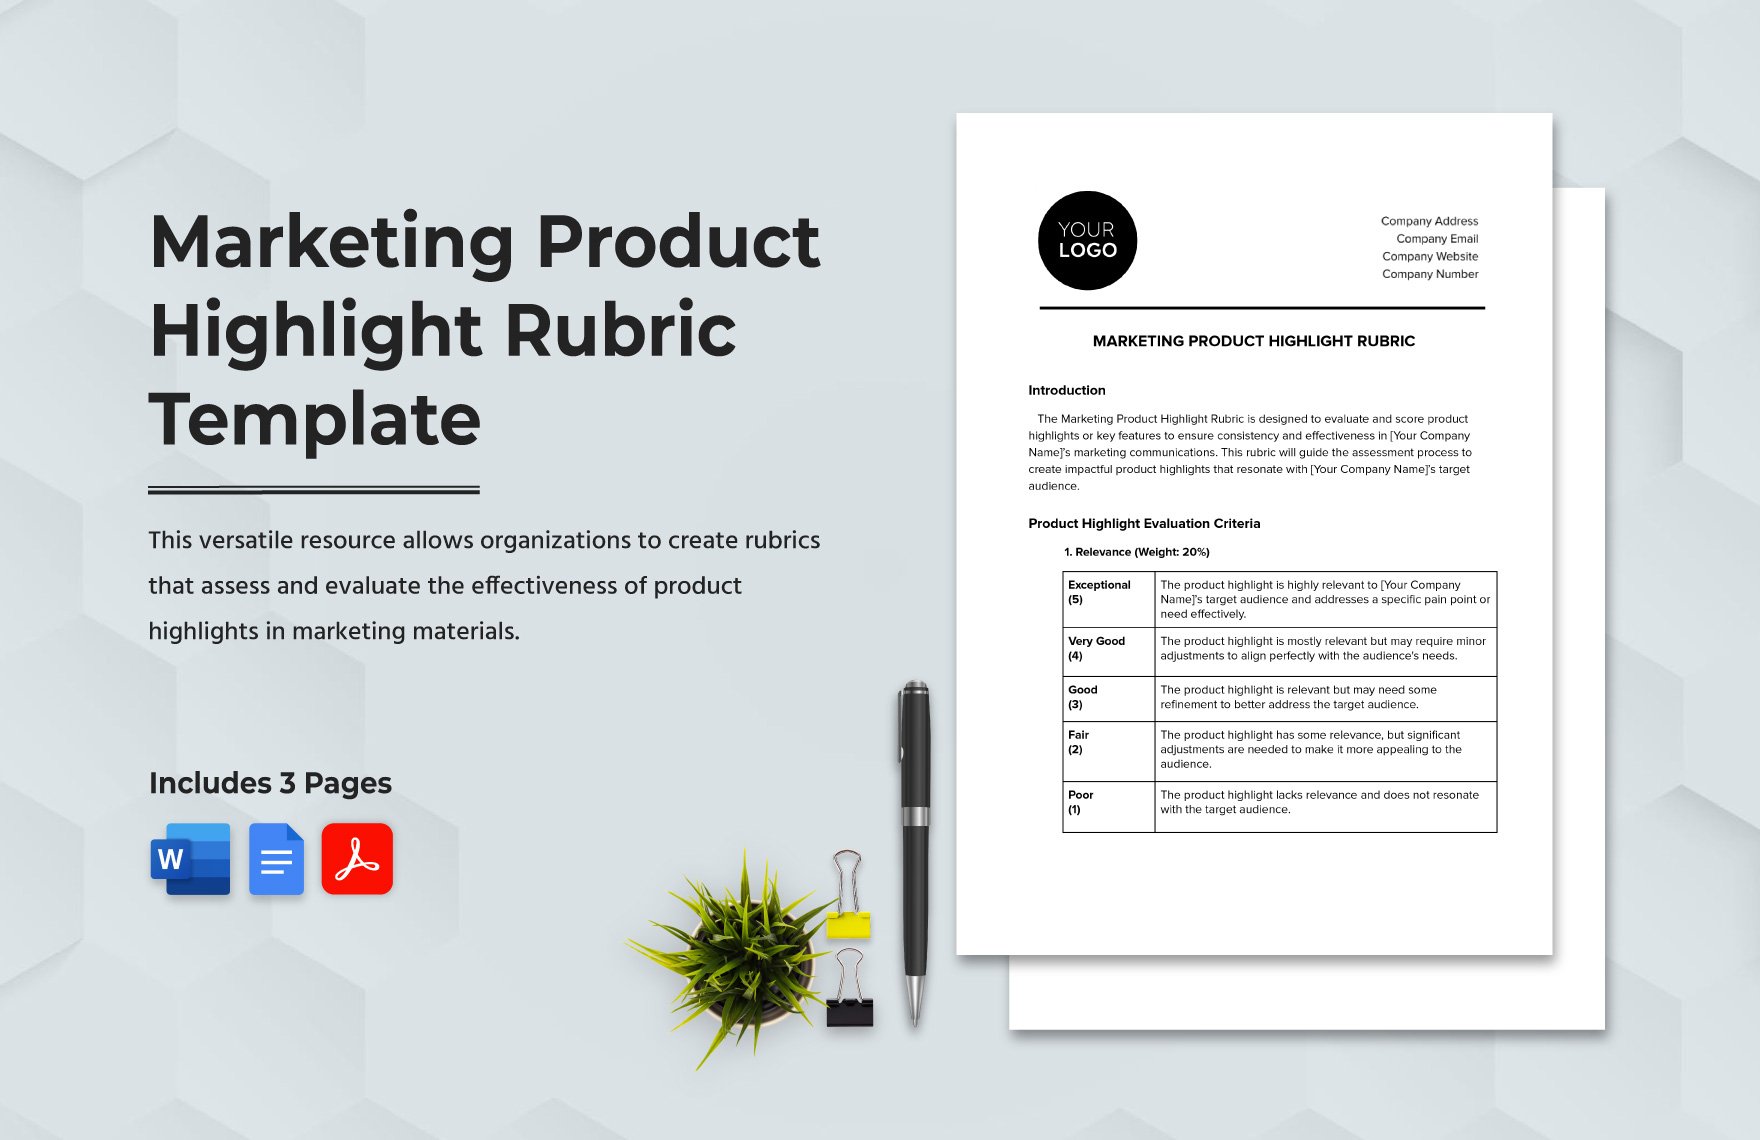 Marketing Product Highlight Rubric Template